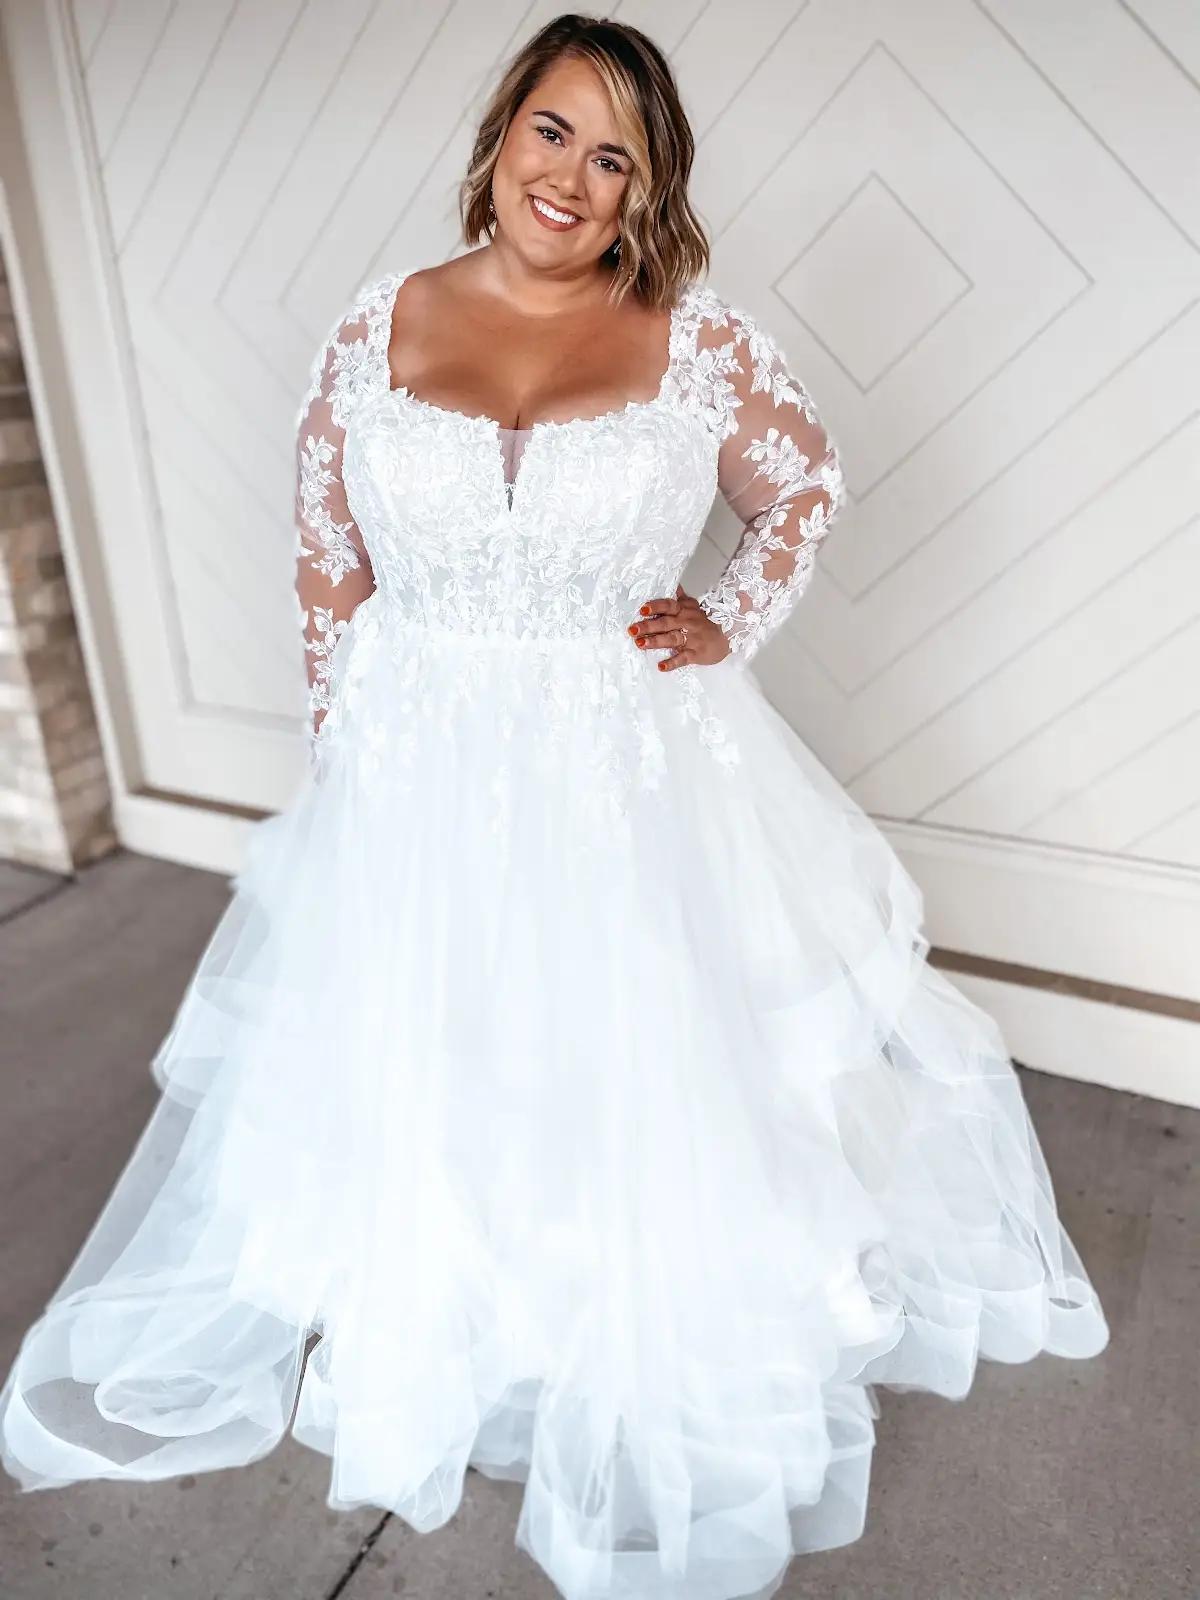 Dress of the Week: 7529 Image